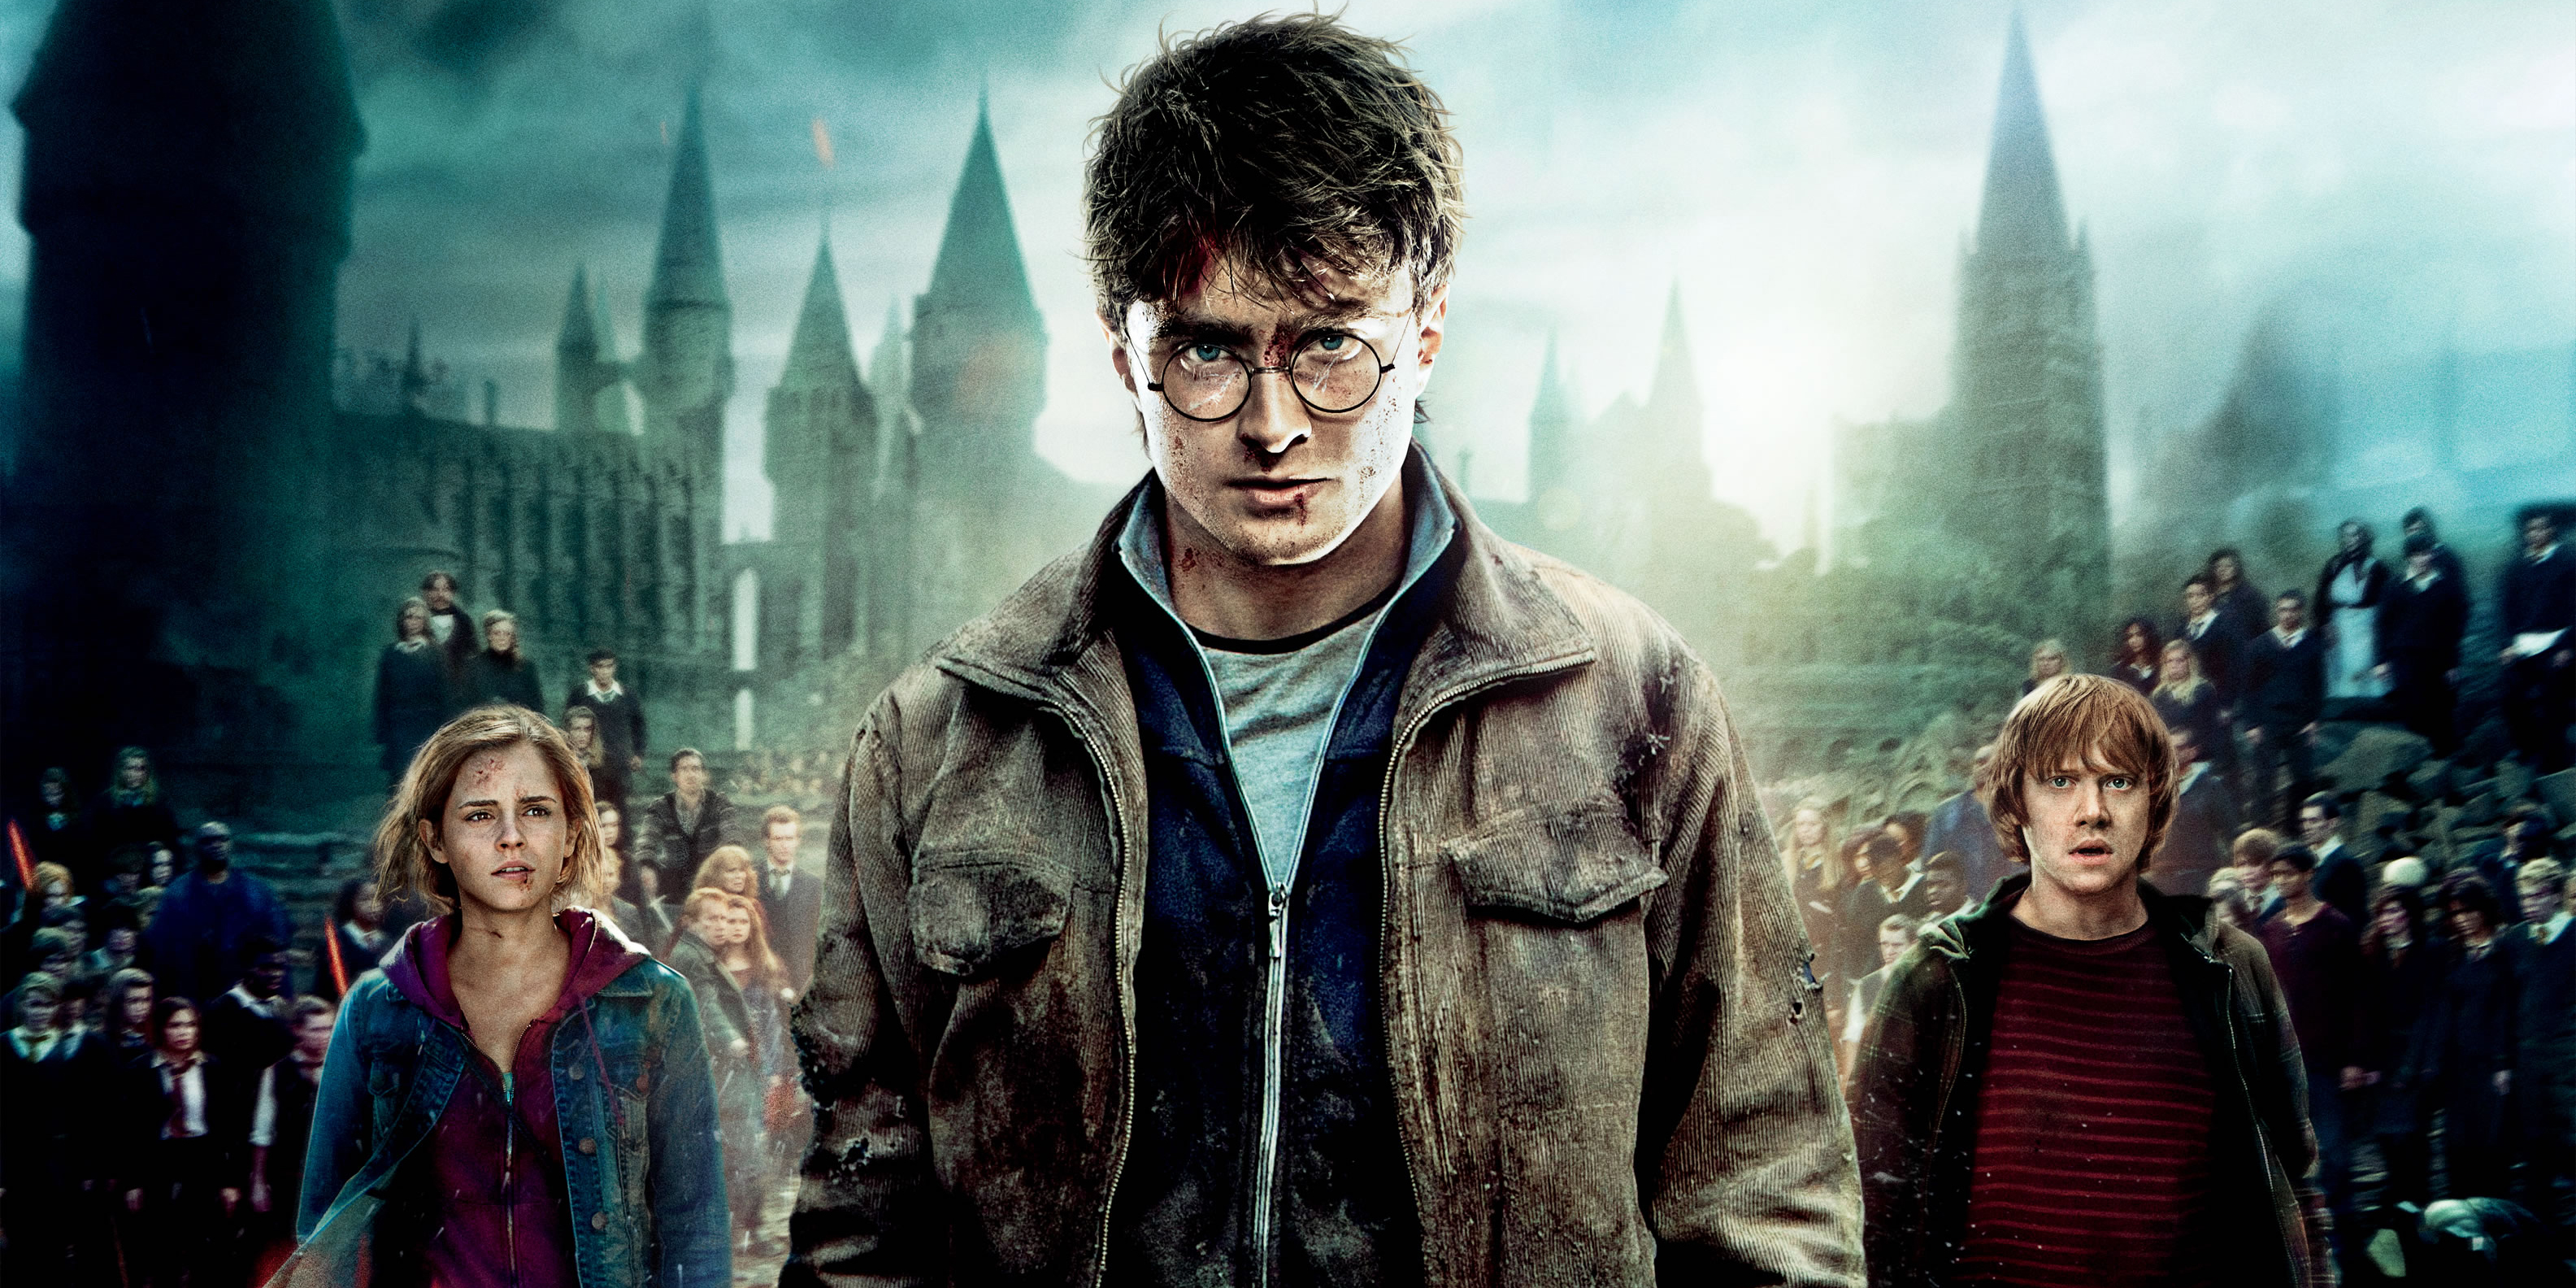 Own all 8 Harry Potter movies in 4K for around $6 each + more from